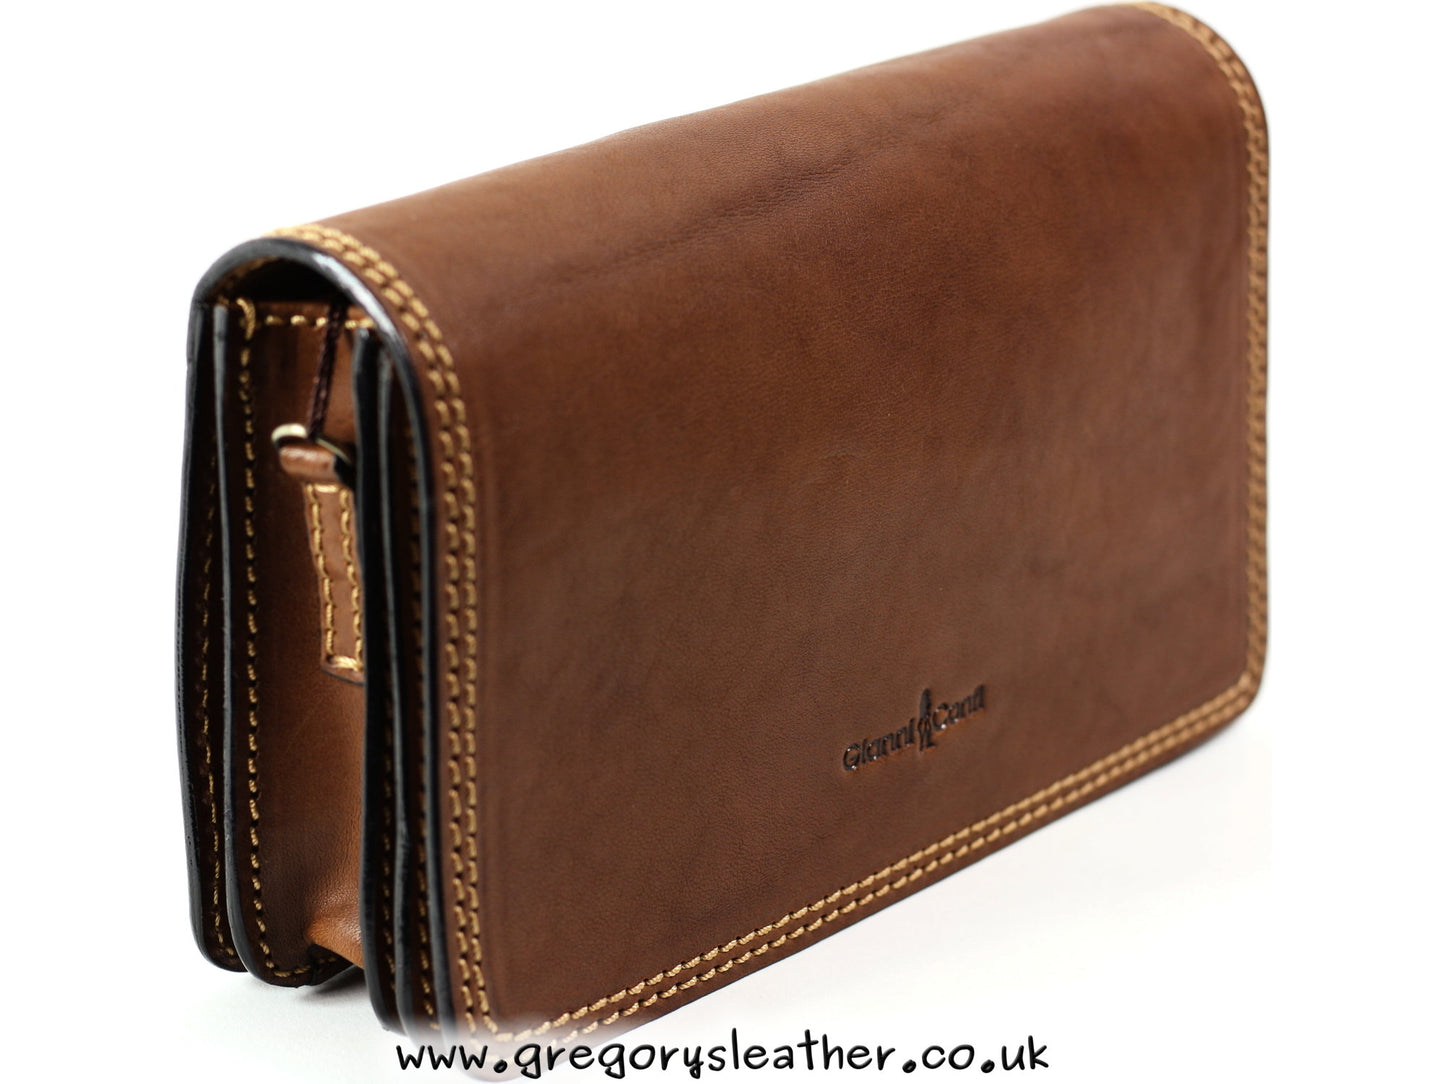 Tan Classic Small Flap Over Bag by Gianni Conti